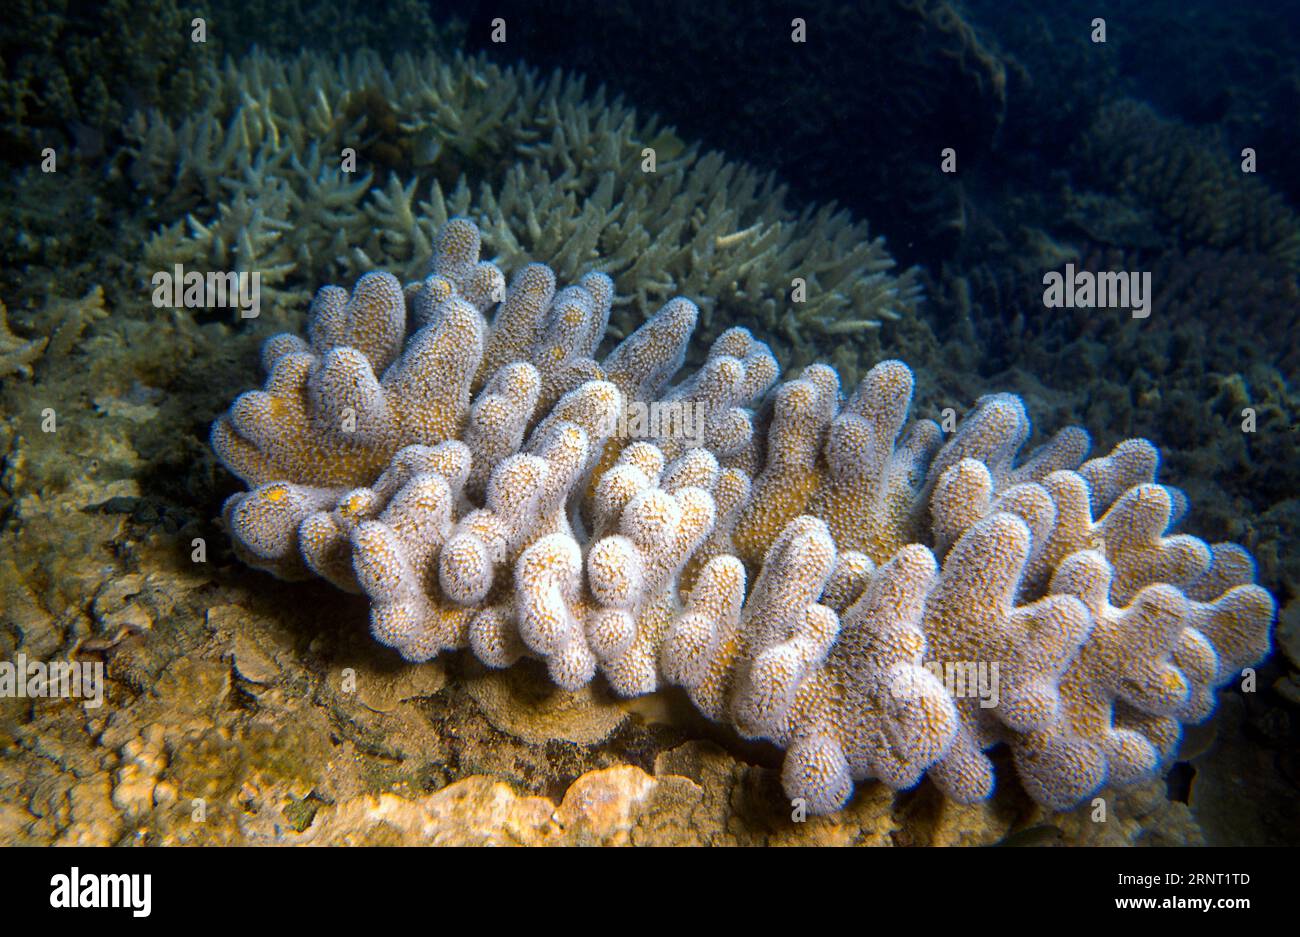 Devil's hand coral (Lobophytum sp.) with fully opened white polyps. Photo from Whitsunday Islands, Great Barrier Reef, Australia. Stock Photo